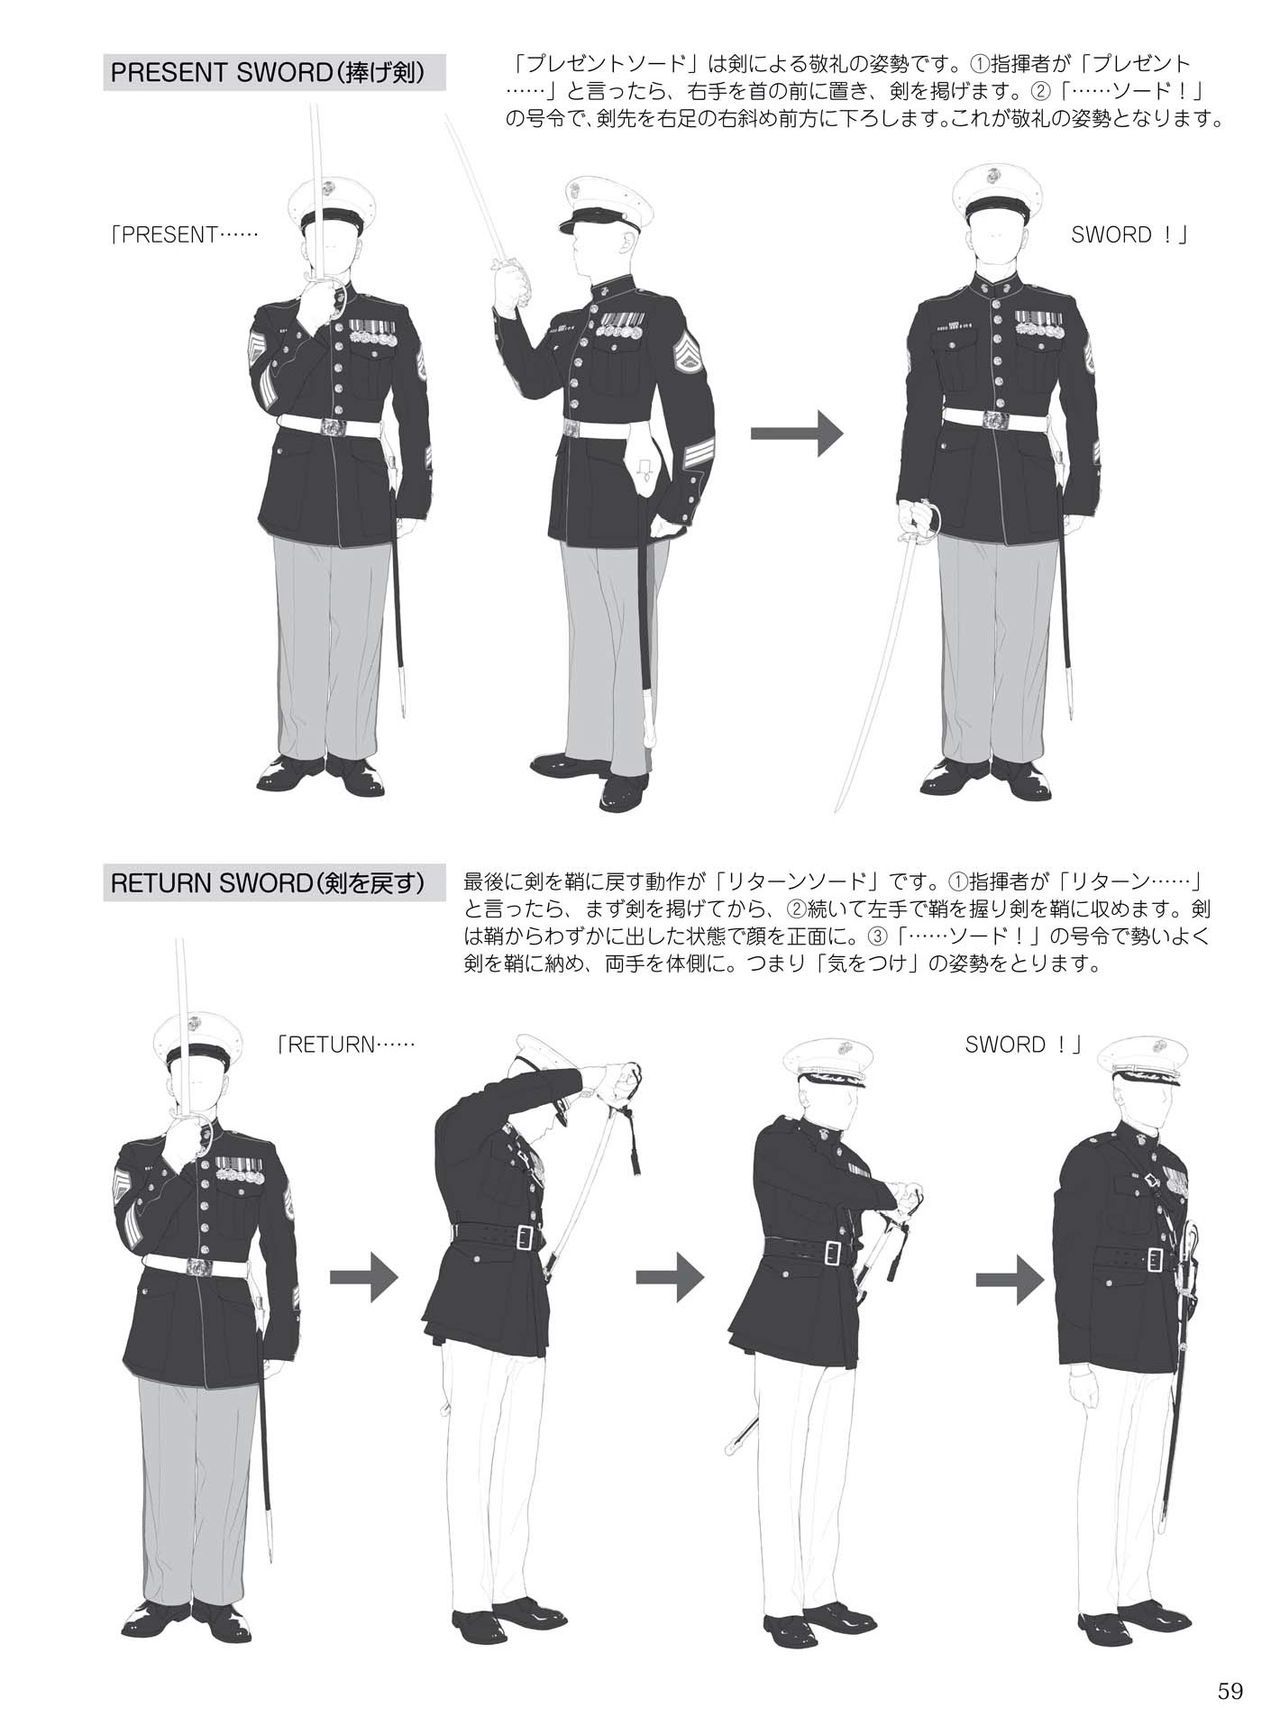 How to draw military uniforms and uniforms From Self-Defense Forces 軍服・制服の描き方 アメリカ軍・自衛隊の制服から戦闘服まで 62